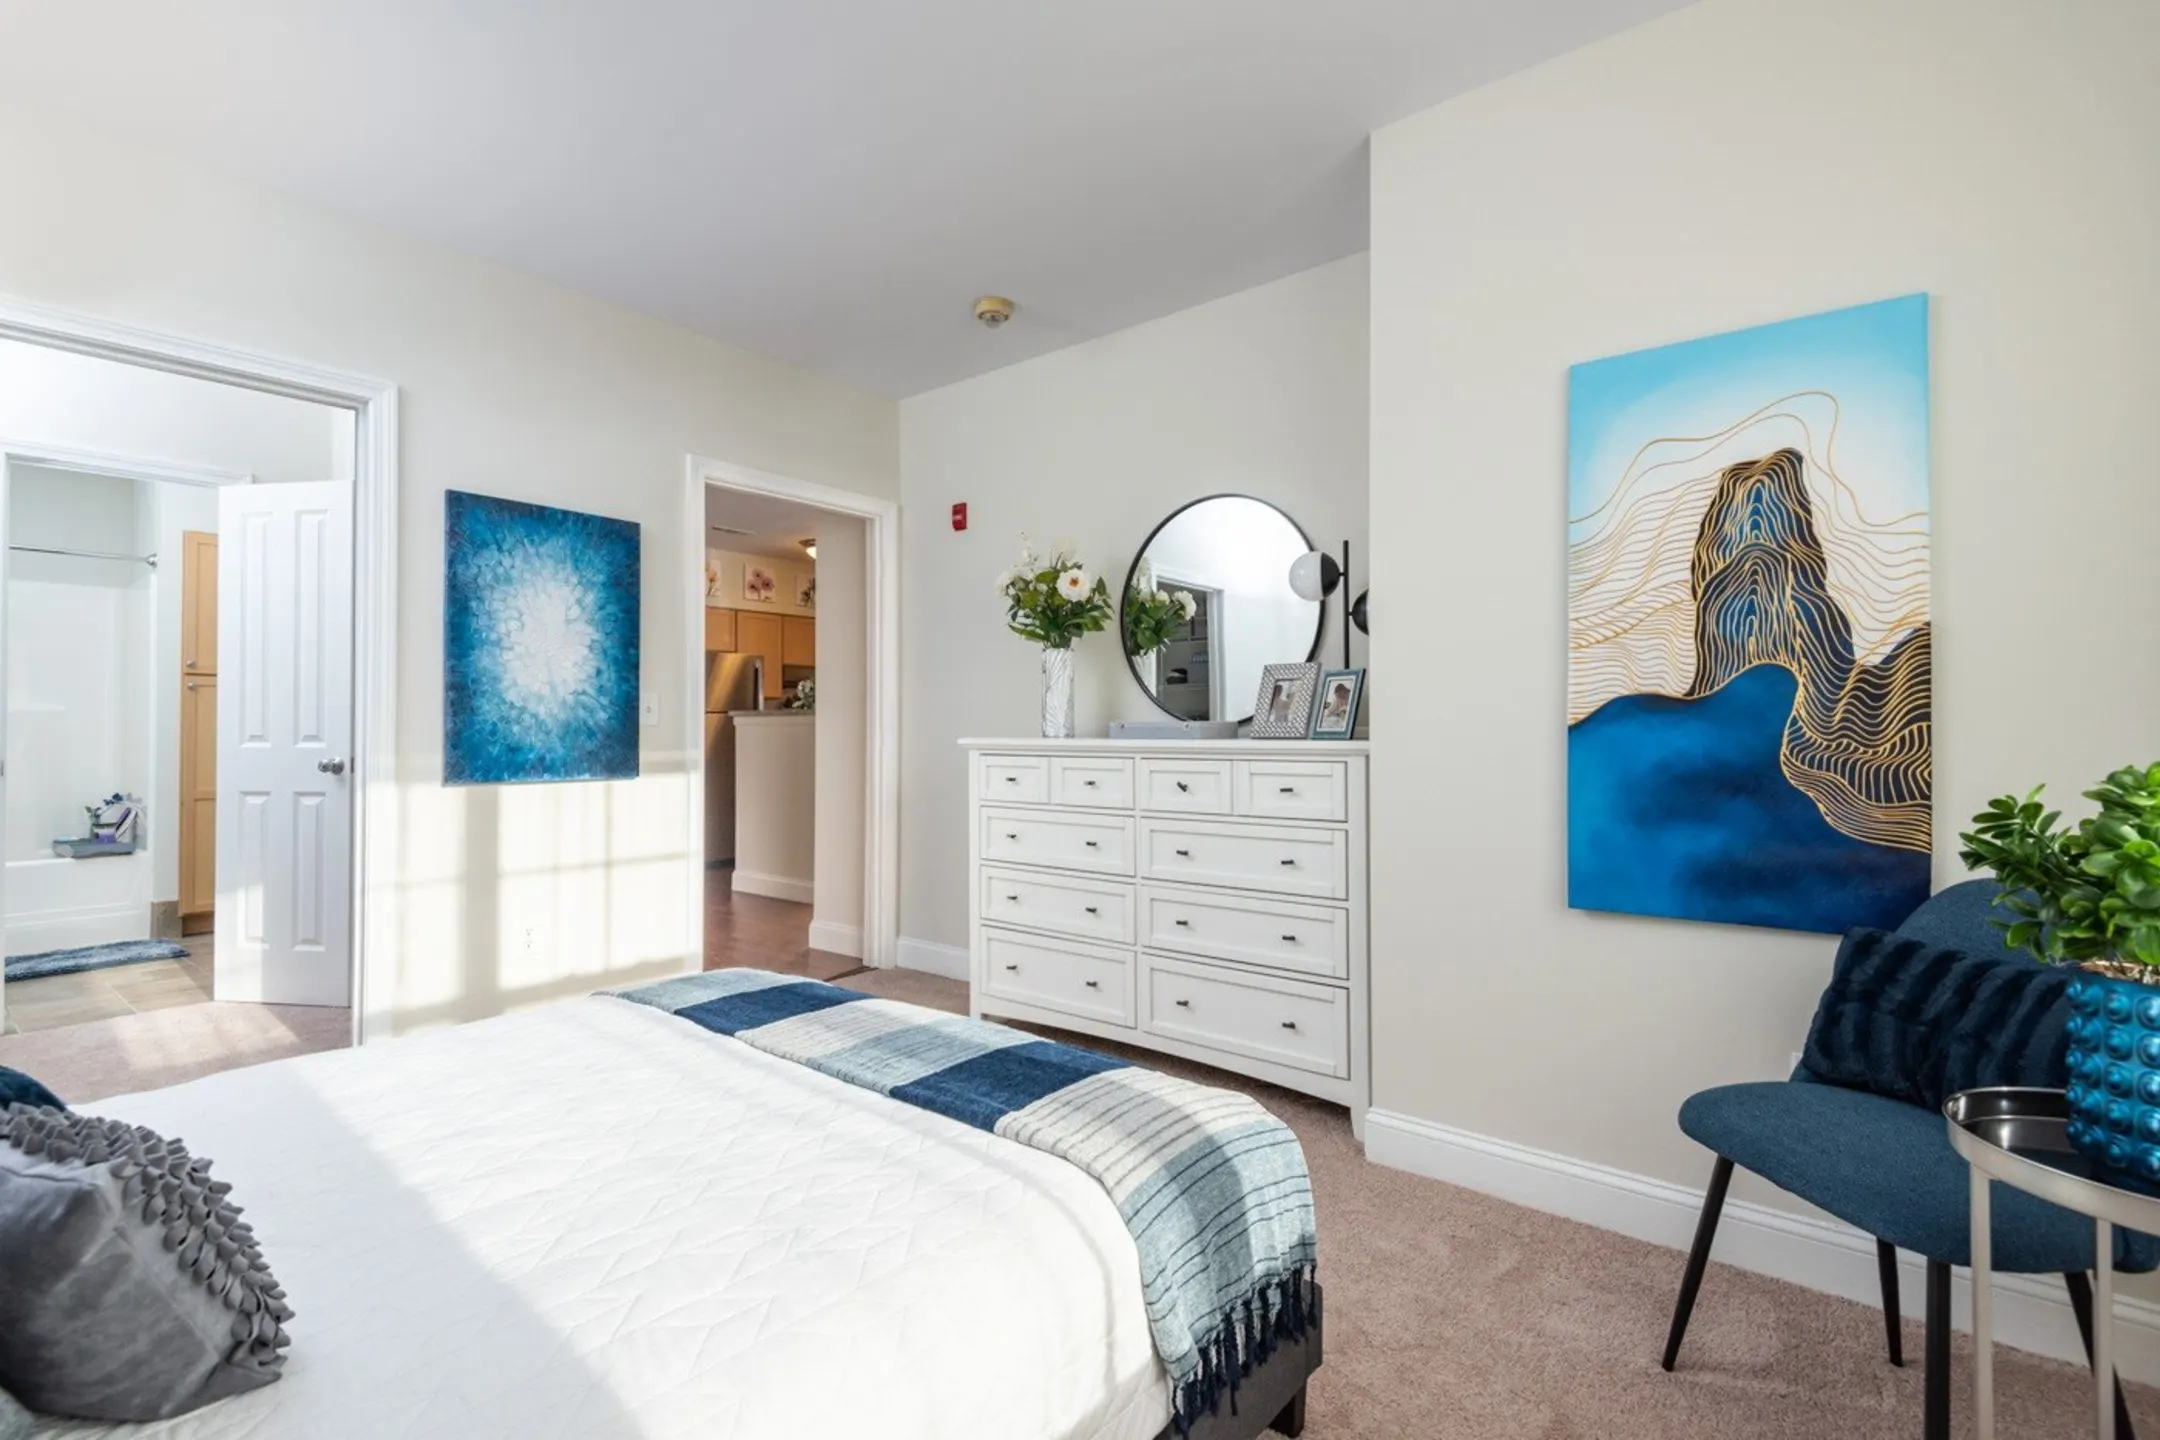 Bedroom - Parkside Commons - Chelsea, MA